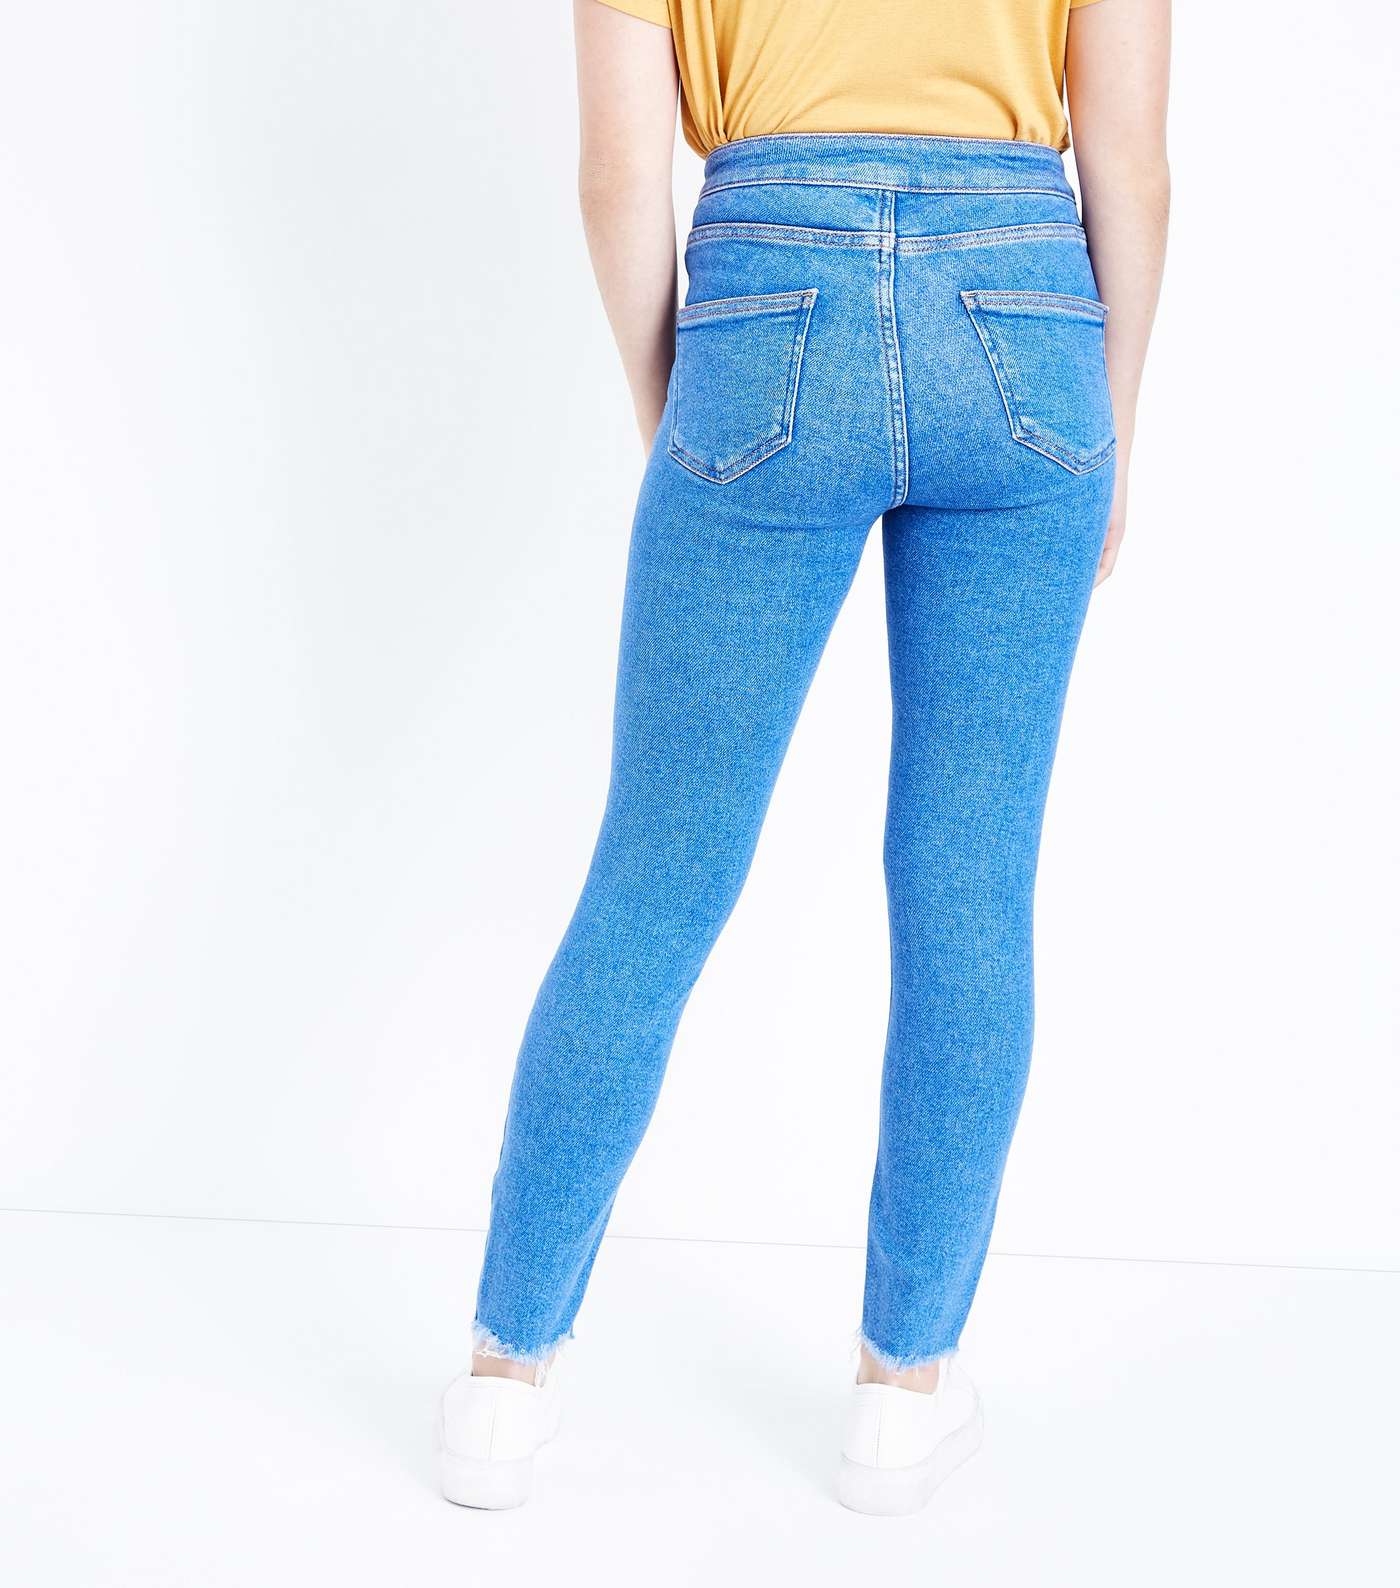 Girls Bright Blue Ripped High Waist Super Skinny Jeans Image 3